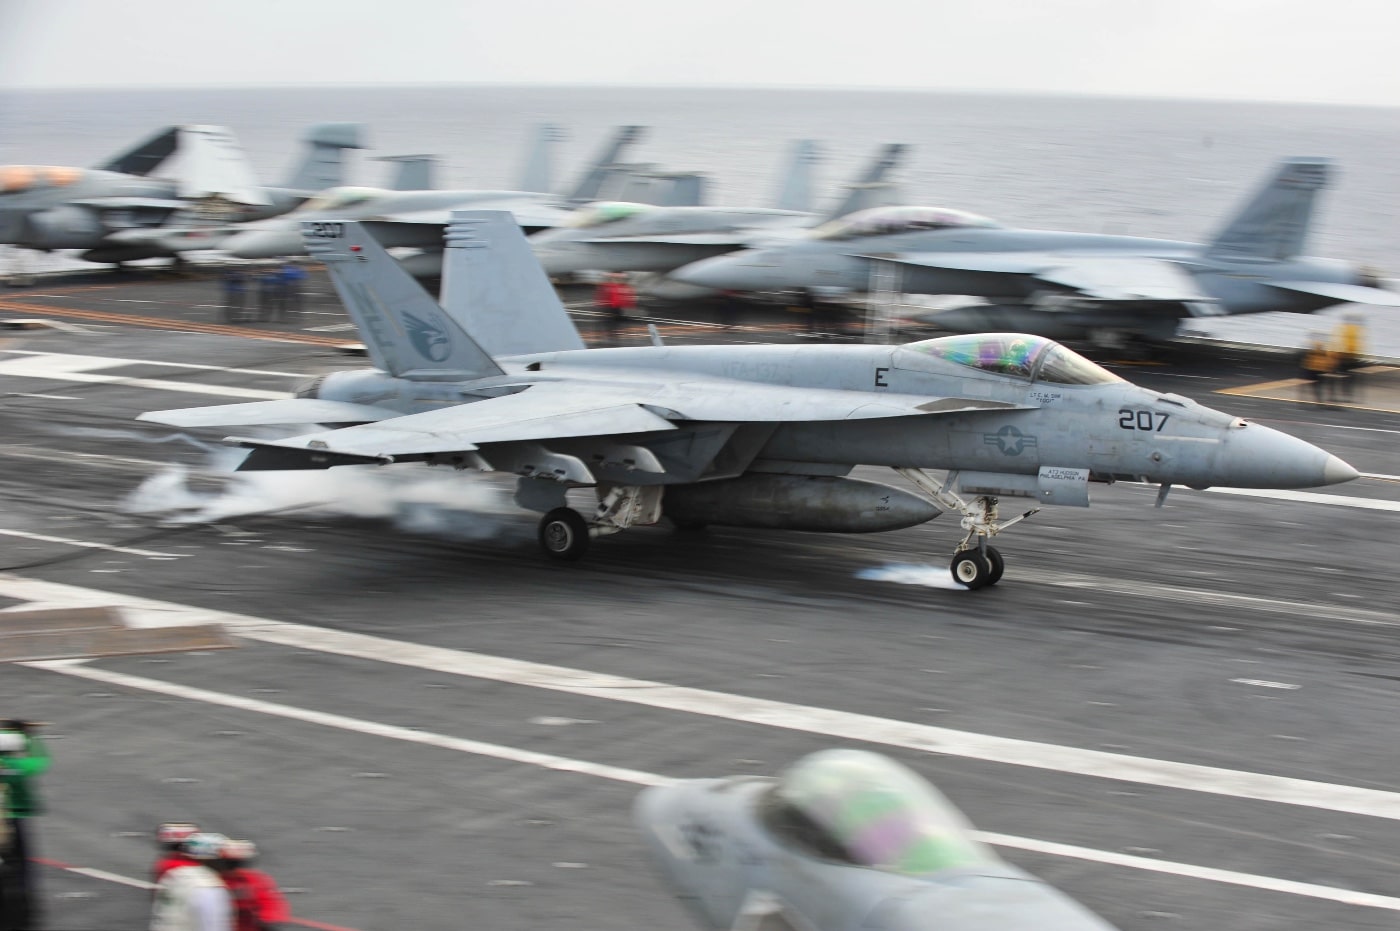 FA-18 launches from catapult of aircraft carrier